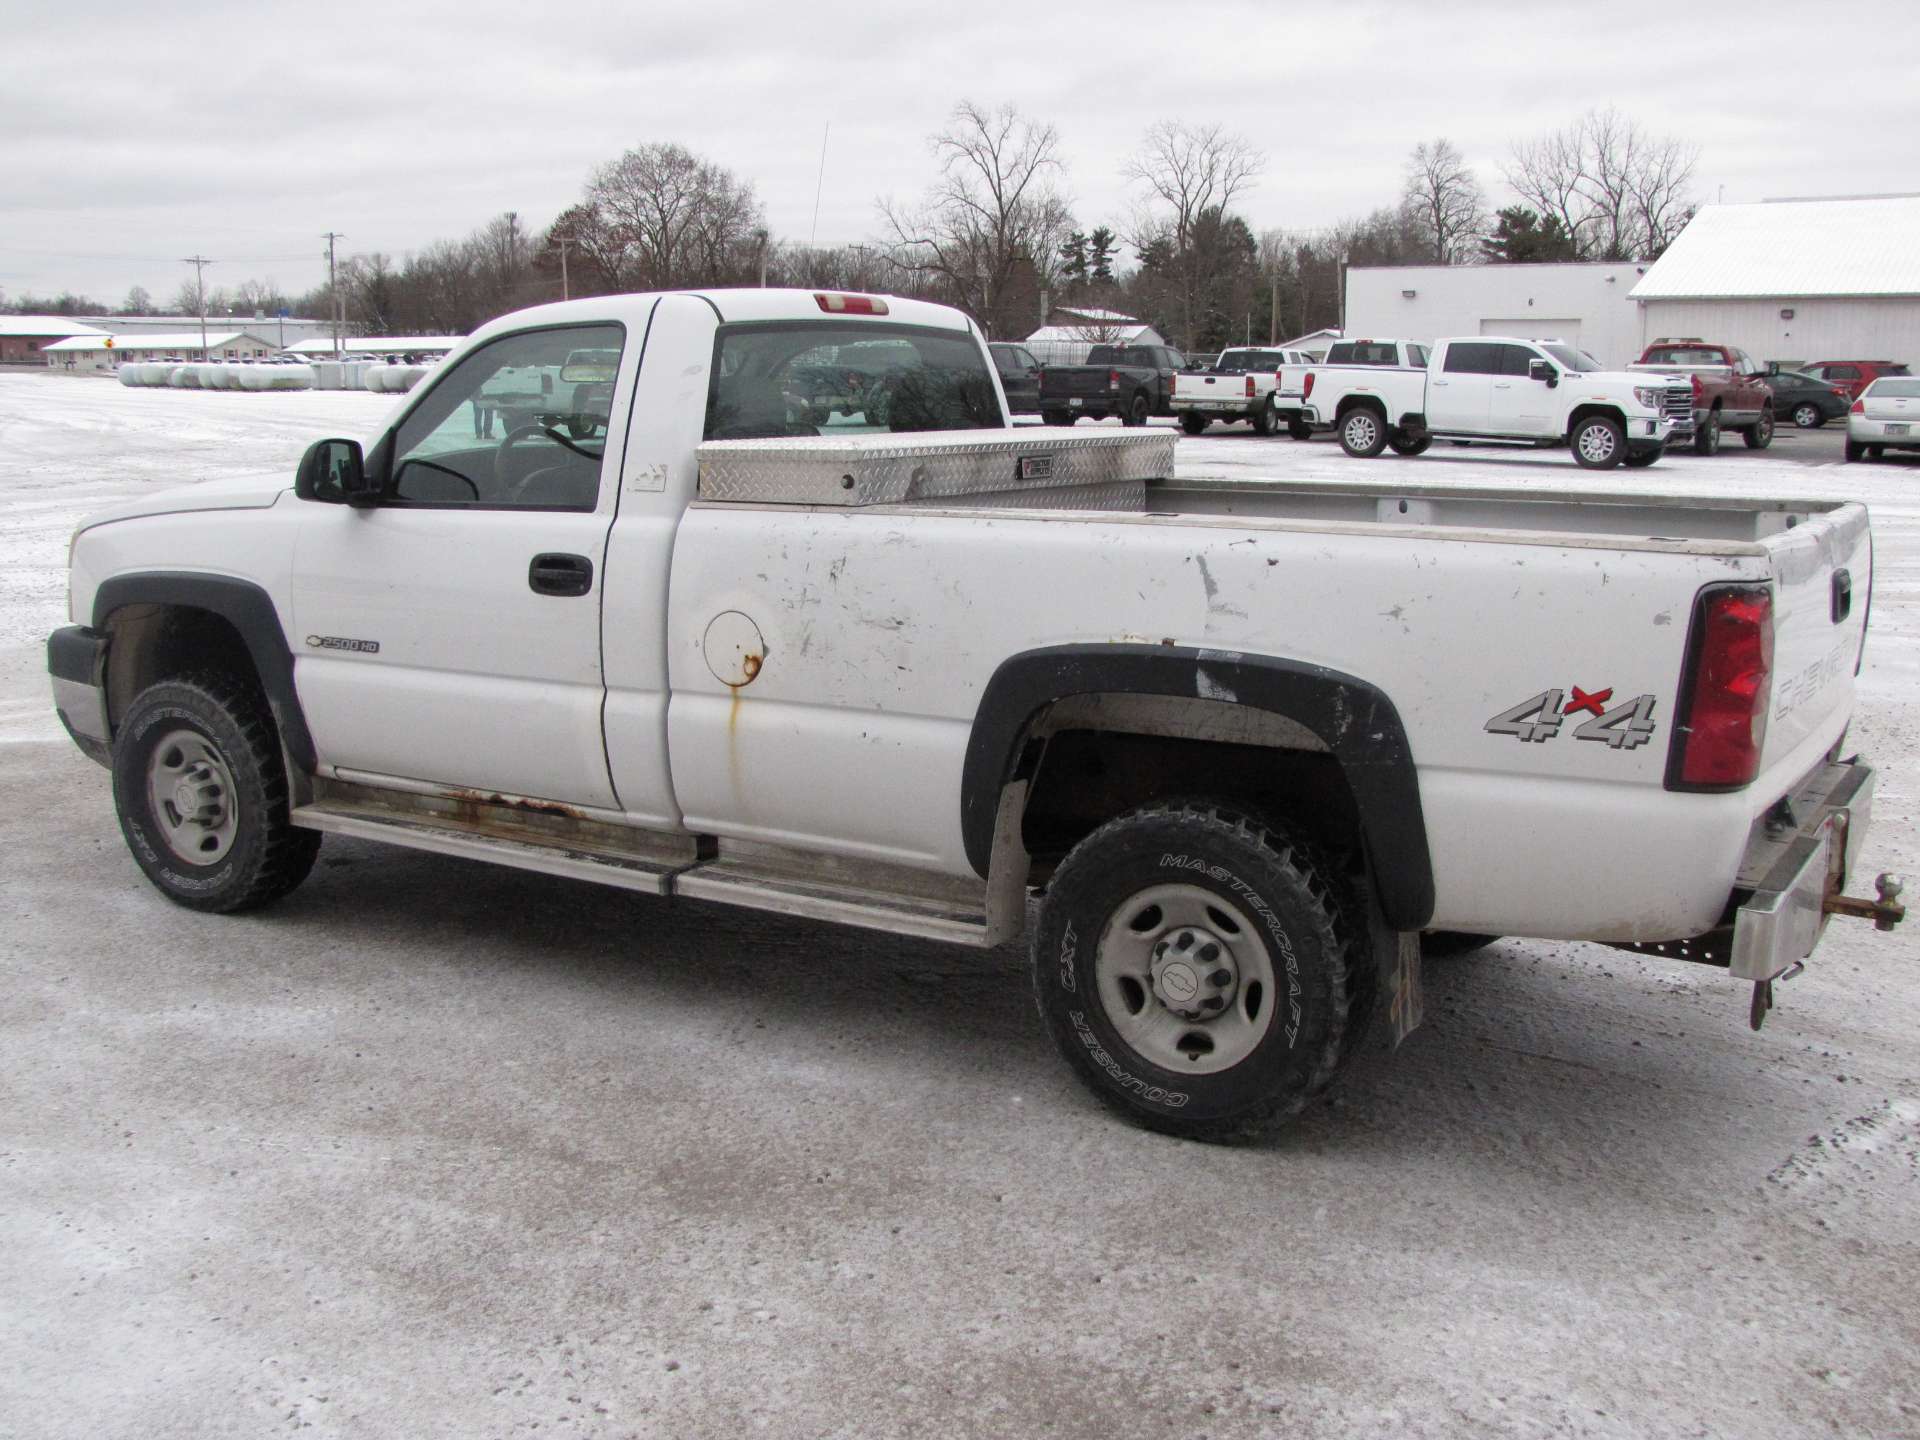 2006 Chevy 2500 HD pickup truck - Image 11 of 63